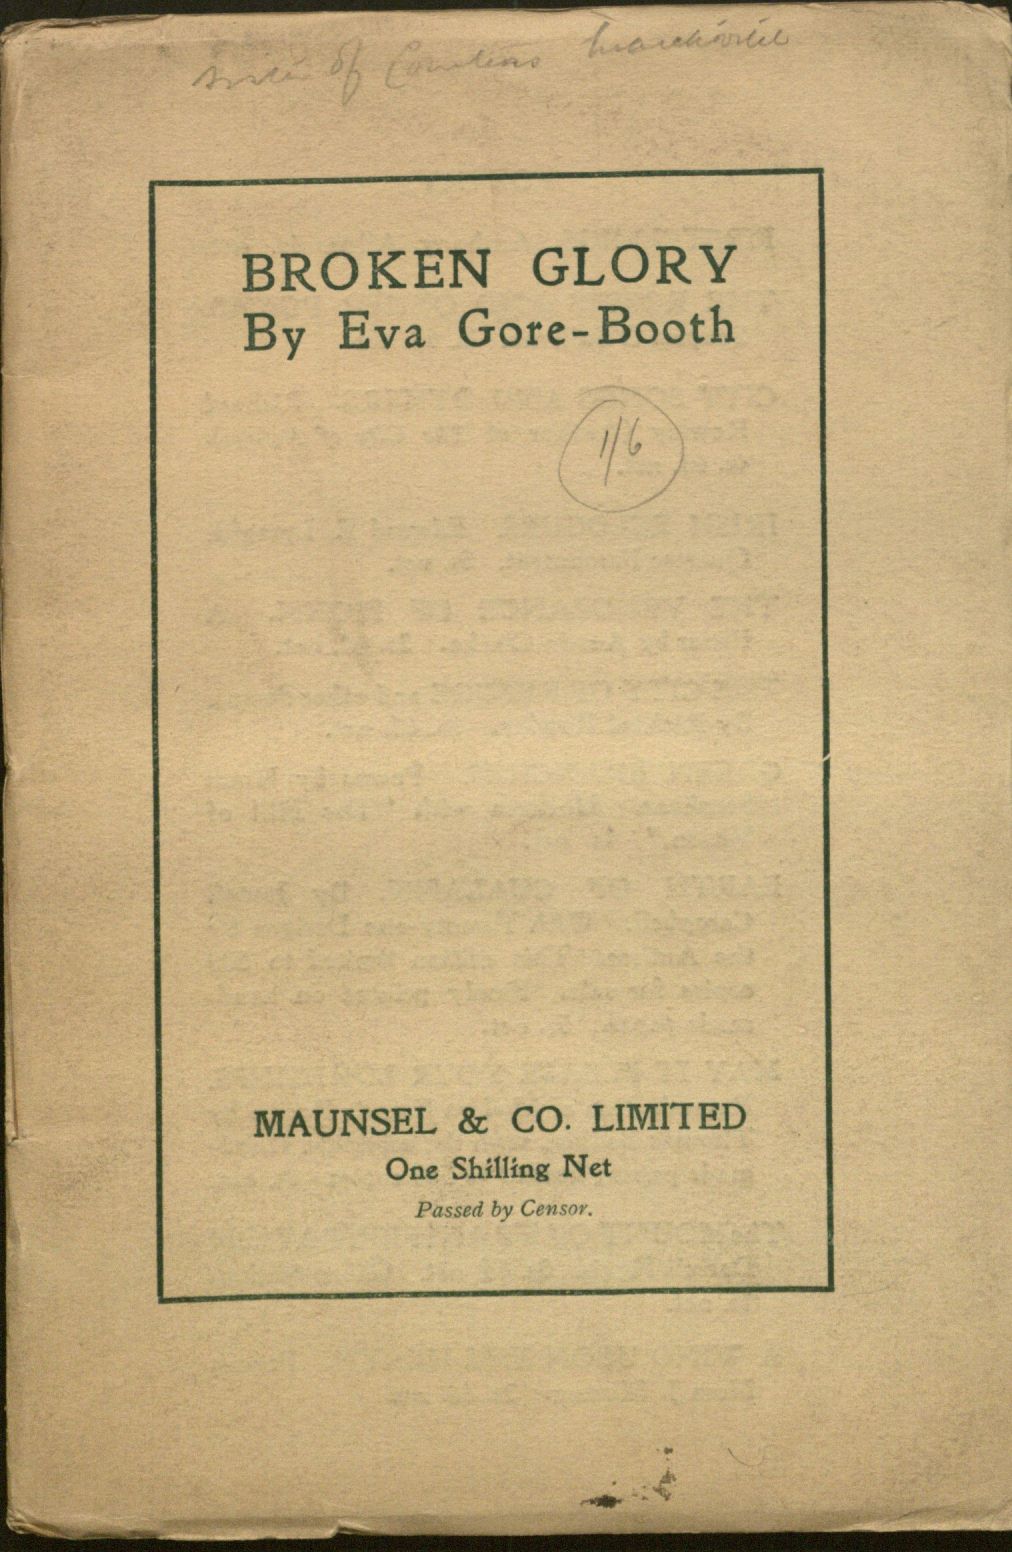 Image of Cover of Eva f Gore-Booth's Broken Glory